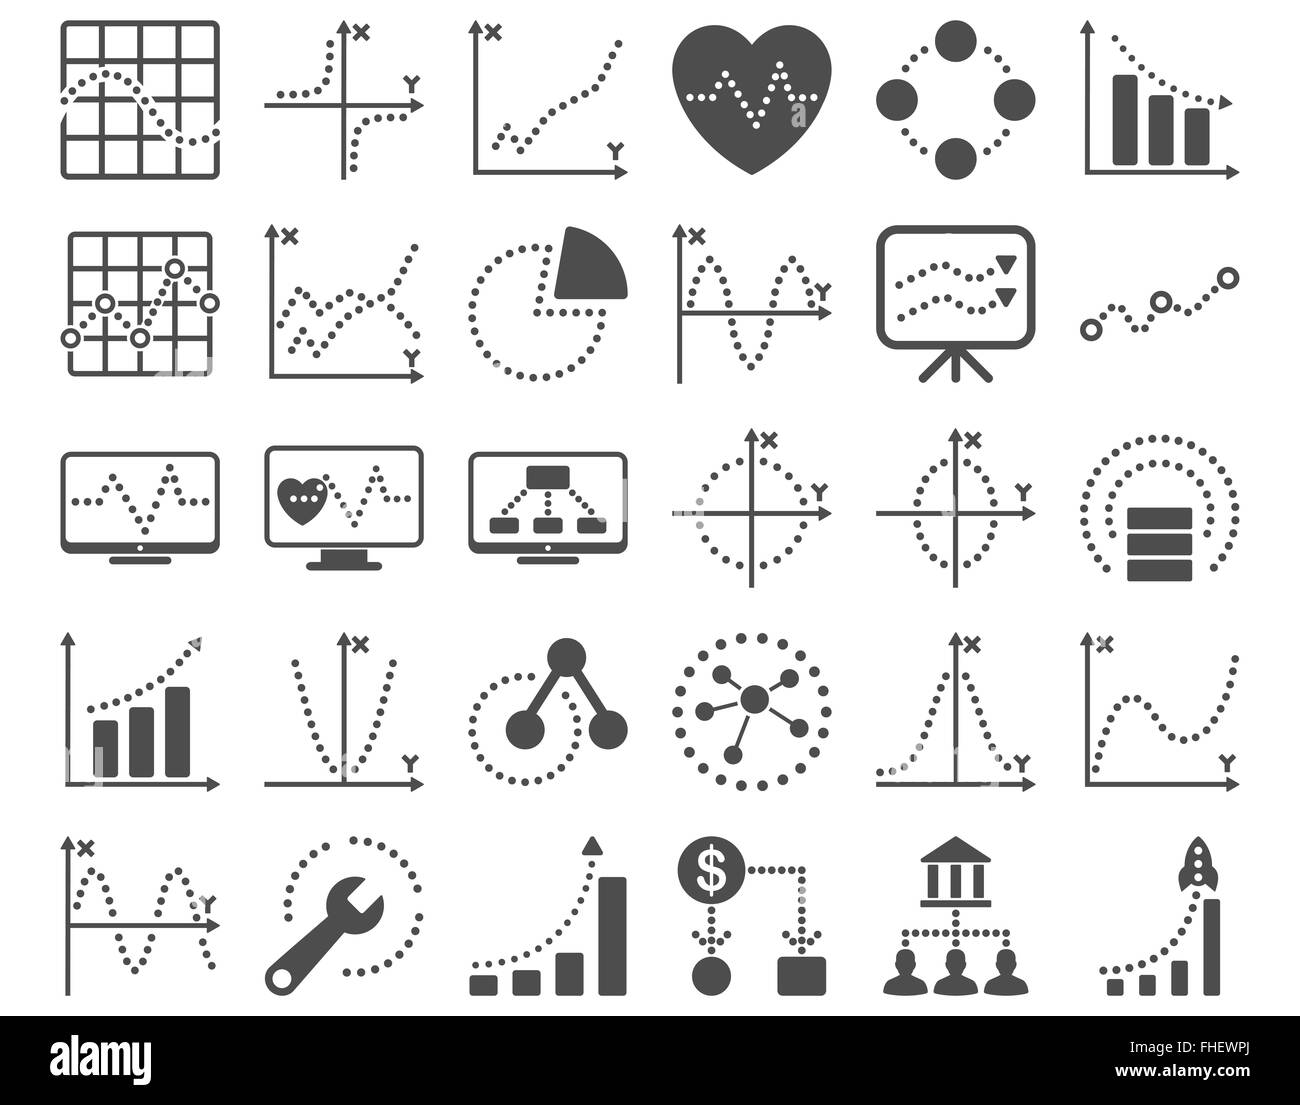 Dotted Charts Icons Stock Photo